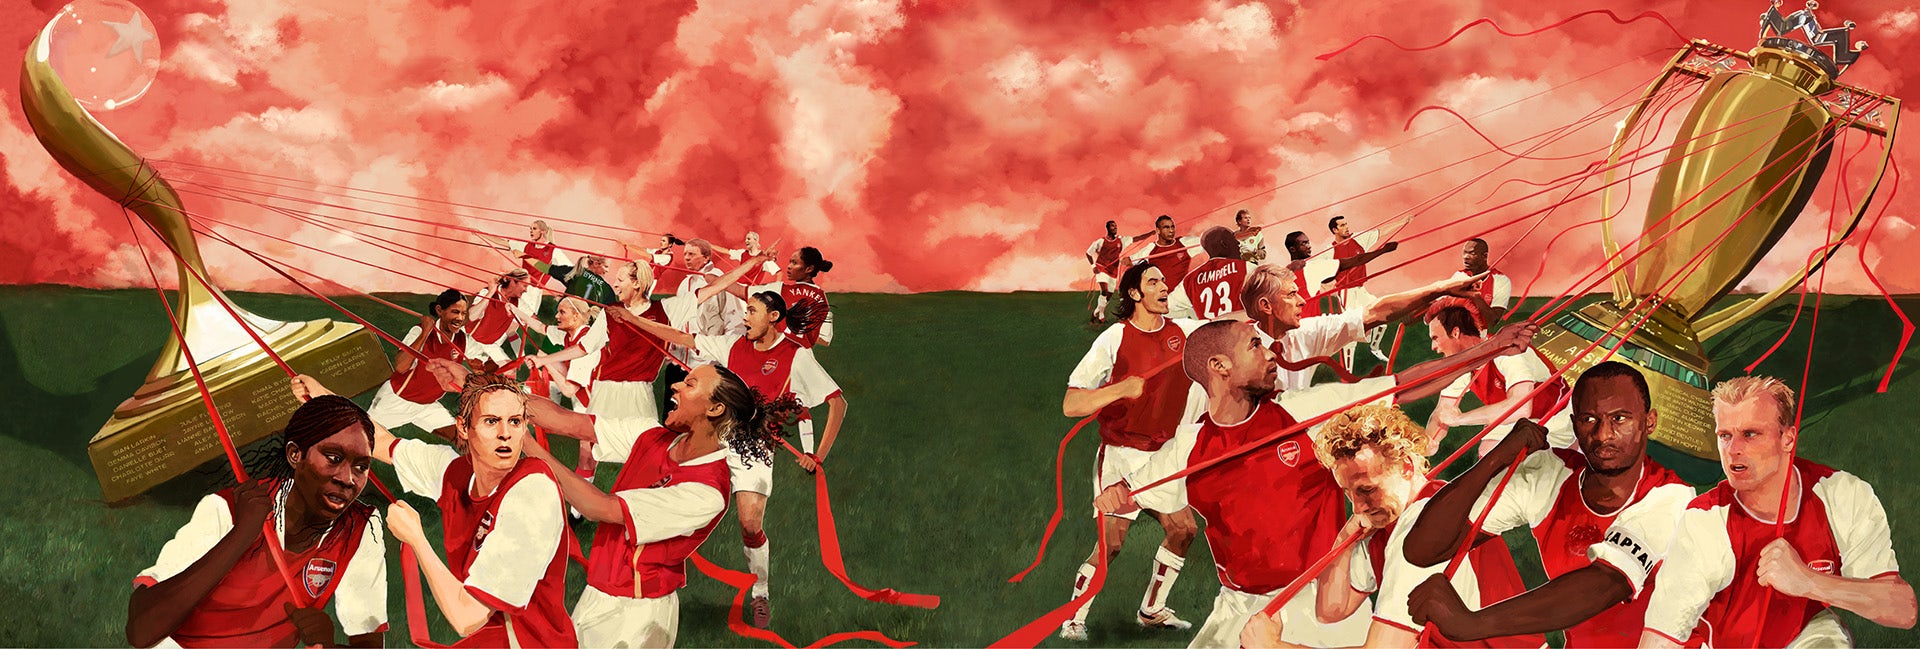 Artwork by Reuben Dangoor showing illustrations of Arsenal players from the club's history hauling trophies by ropes